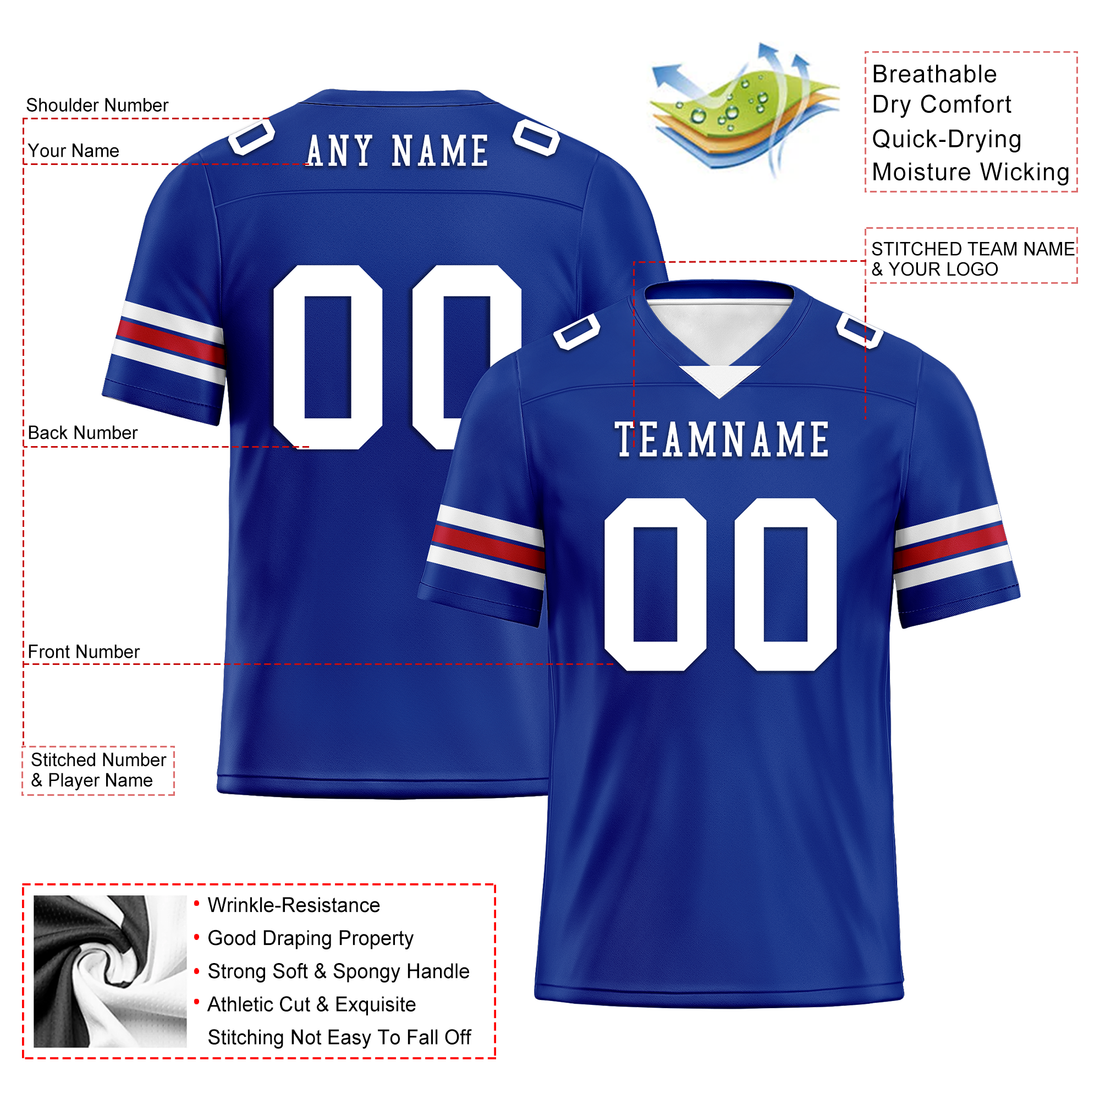 Custom Blue Classic Style Personalized Authentic Football Jersey FBJ02-bd0a70aa